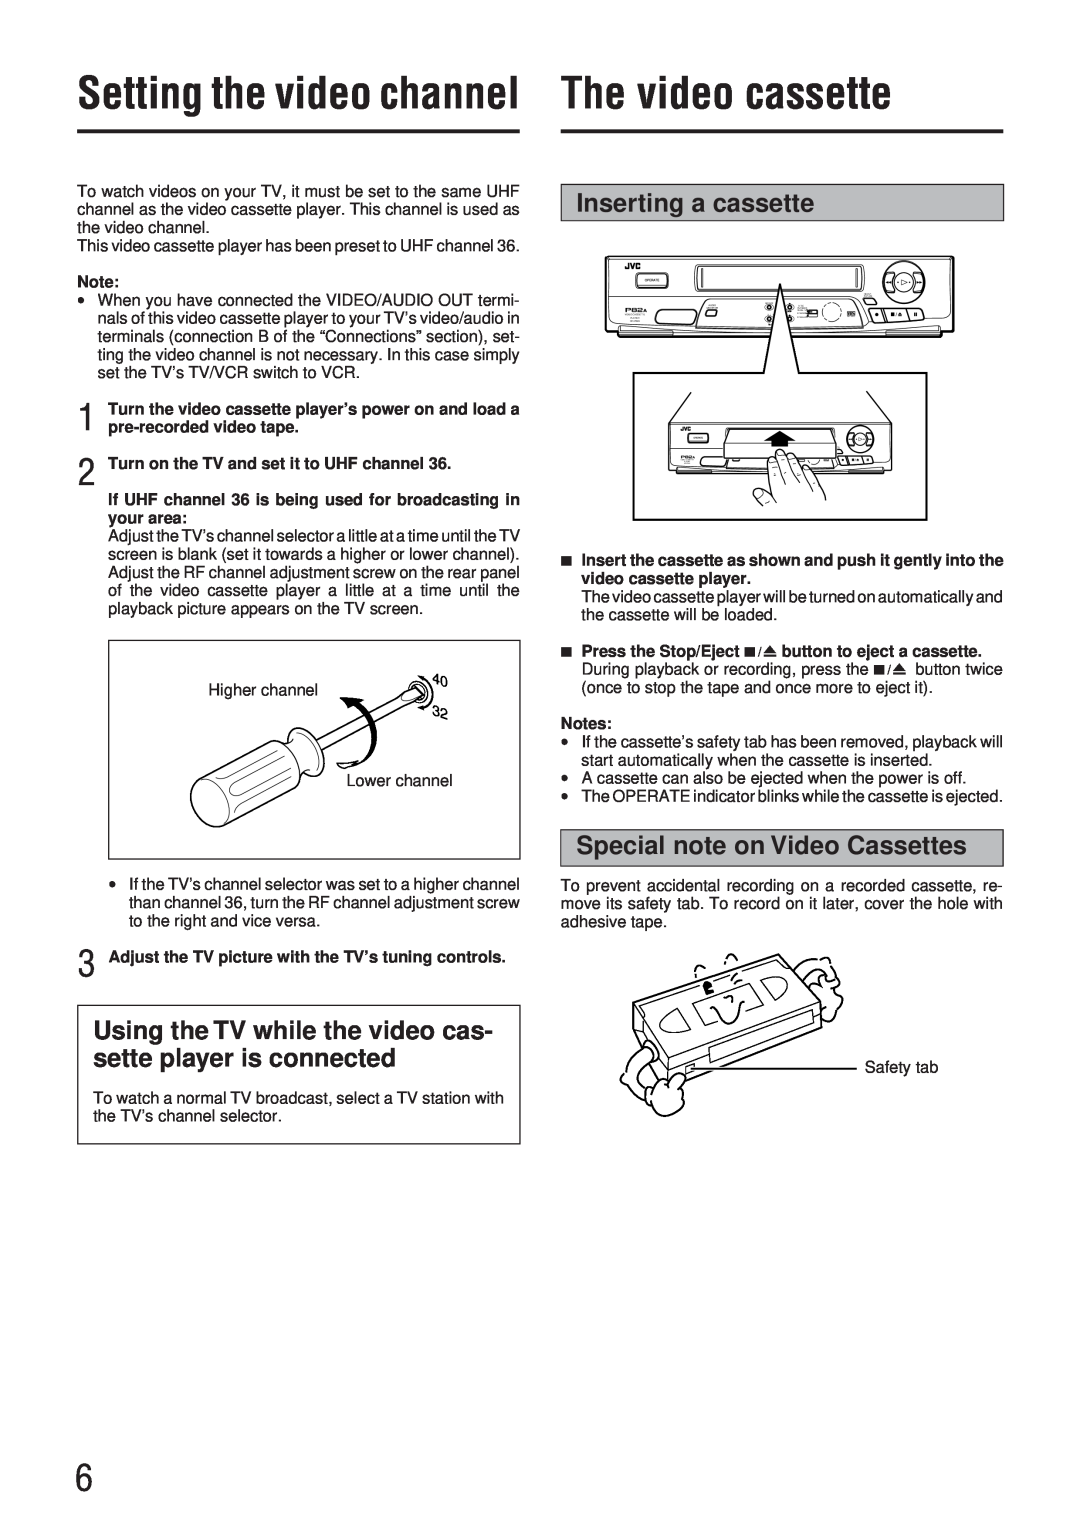 JVC HR-P82A manual The video cassette, Using the TV while the video cas- sette player is connected, Inserting a cassette 